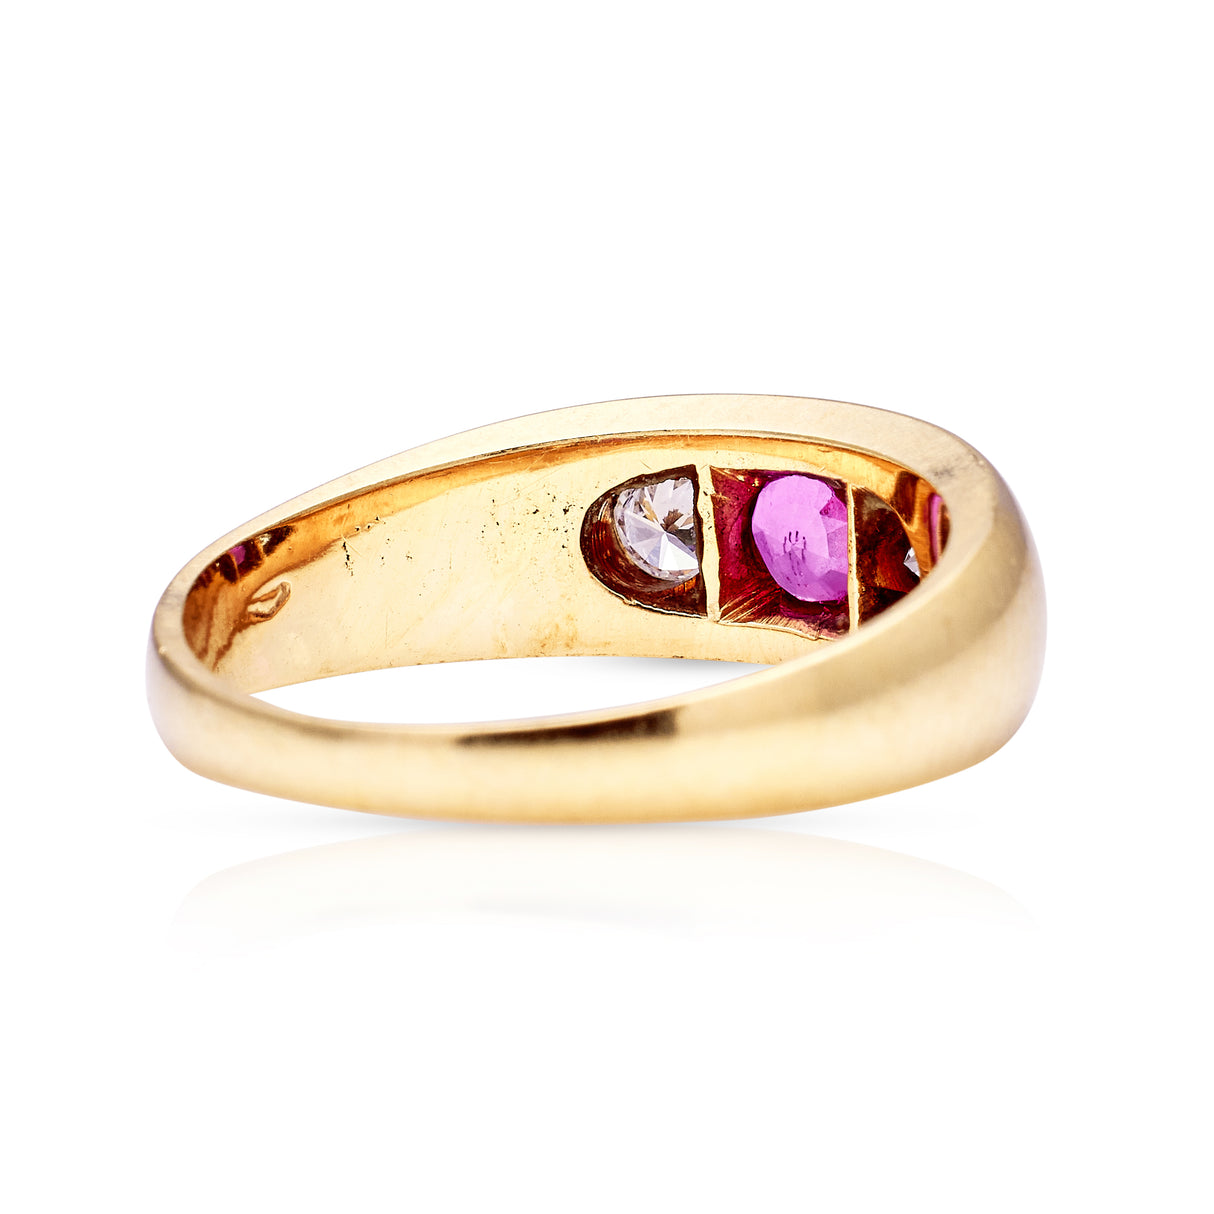 Vintage, ruby & diamond gypsy ring, 14ct yellow gold